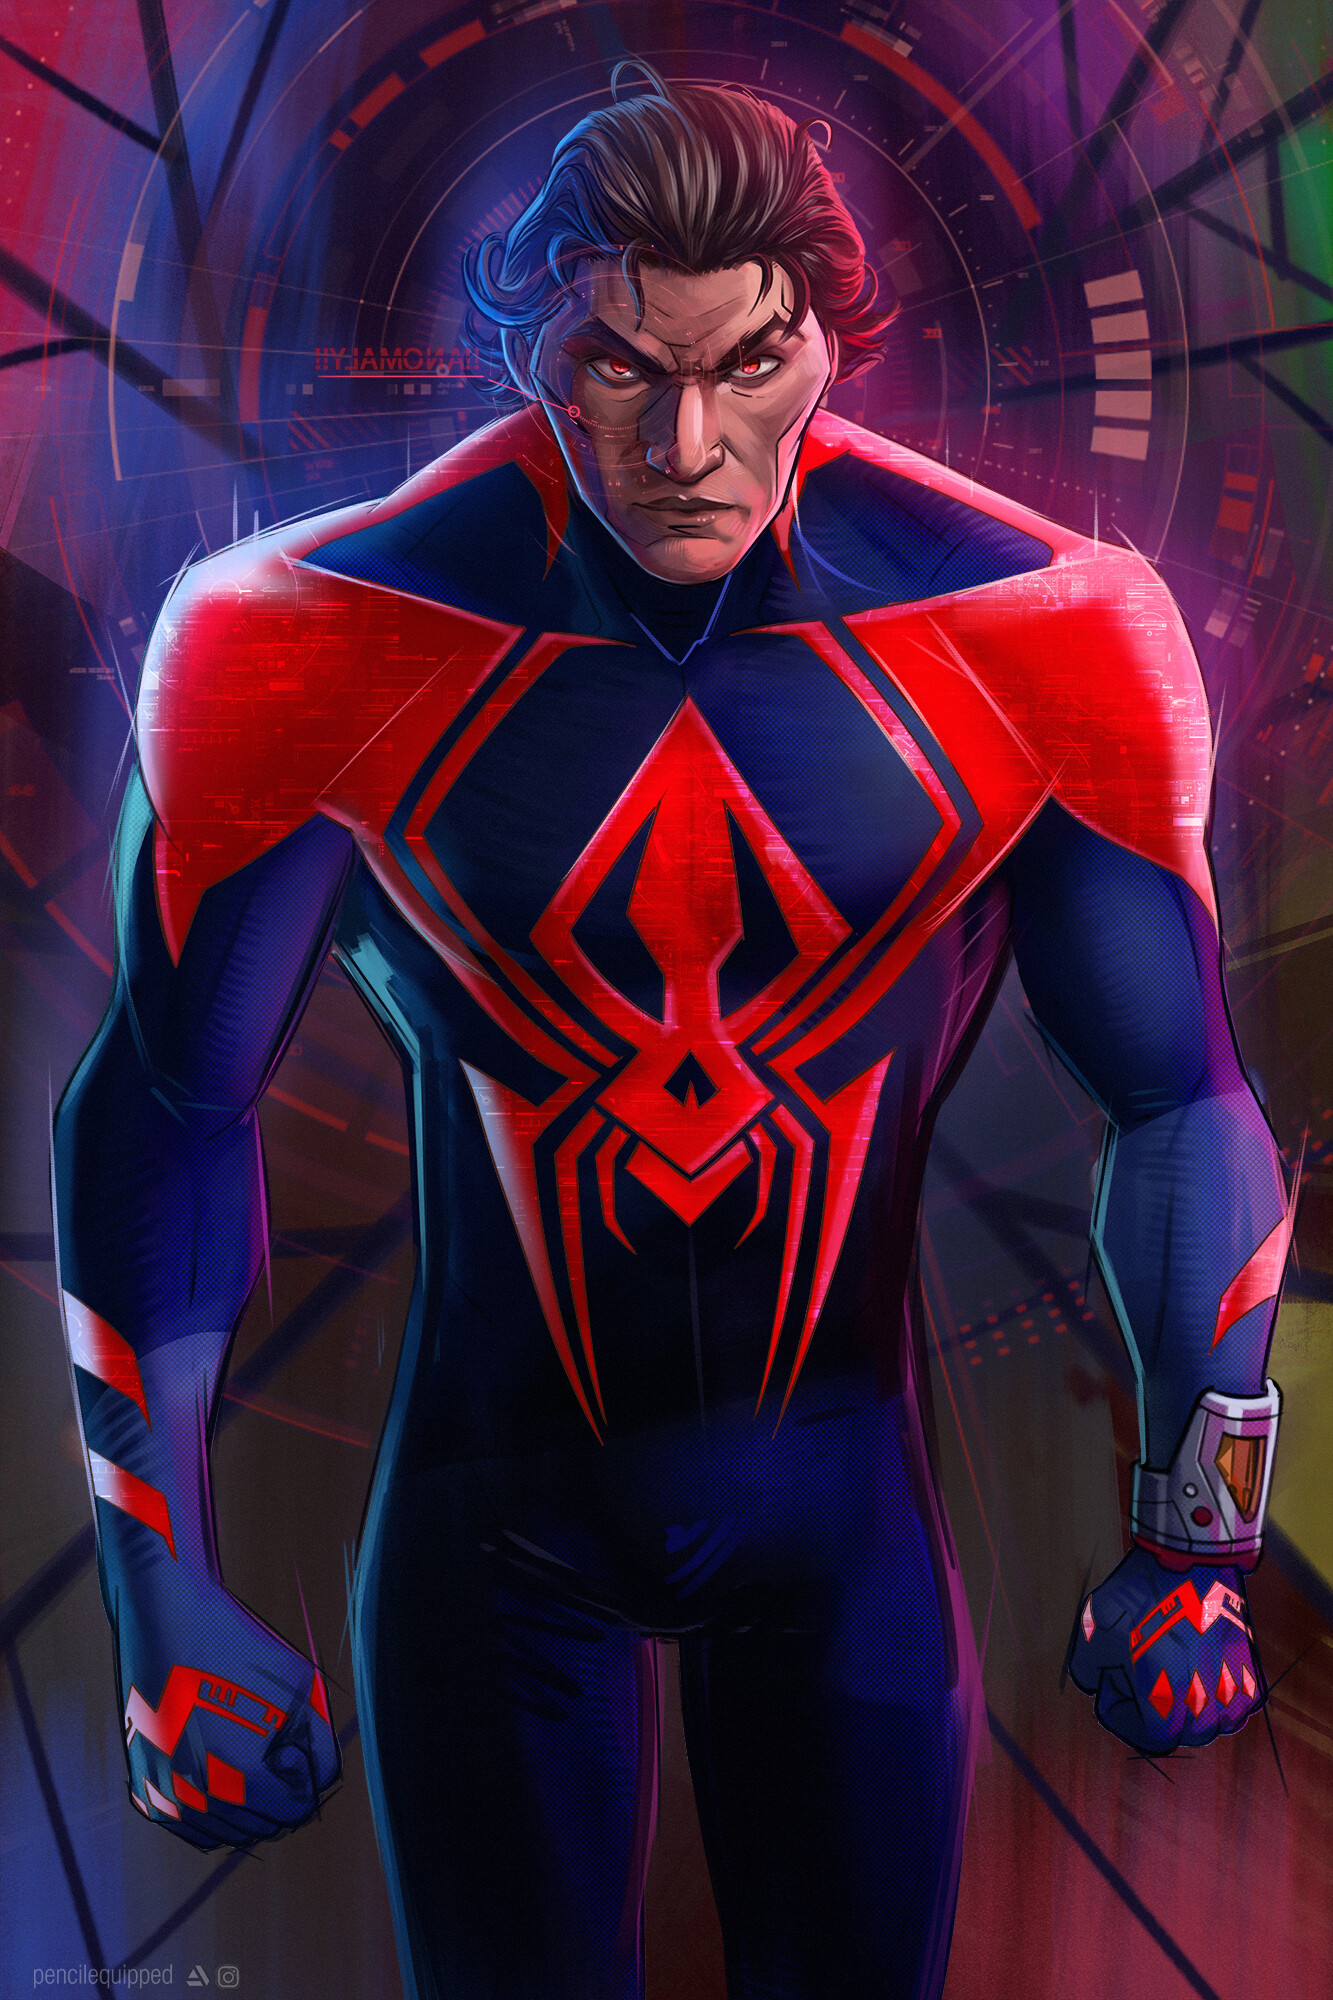 https://cdnb.artstation.com/p/assets/images/images/064/122/589/large/pencil-equipped-spider-man2099-pencilequippedsm.jpg?1687185879